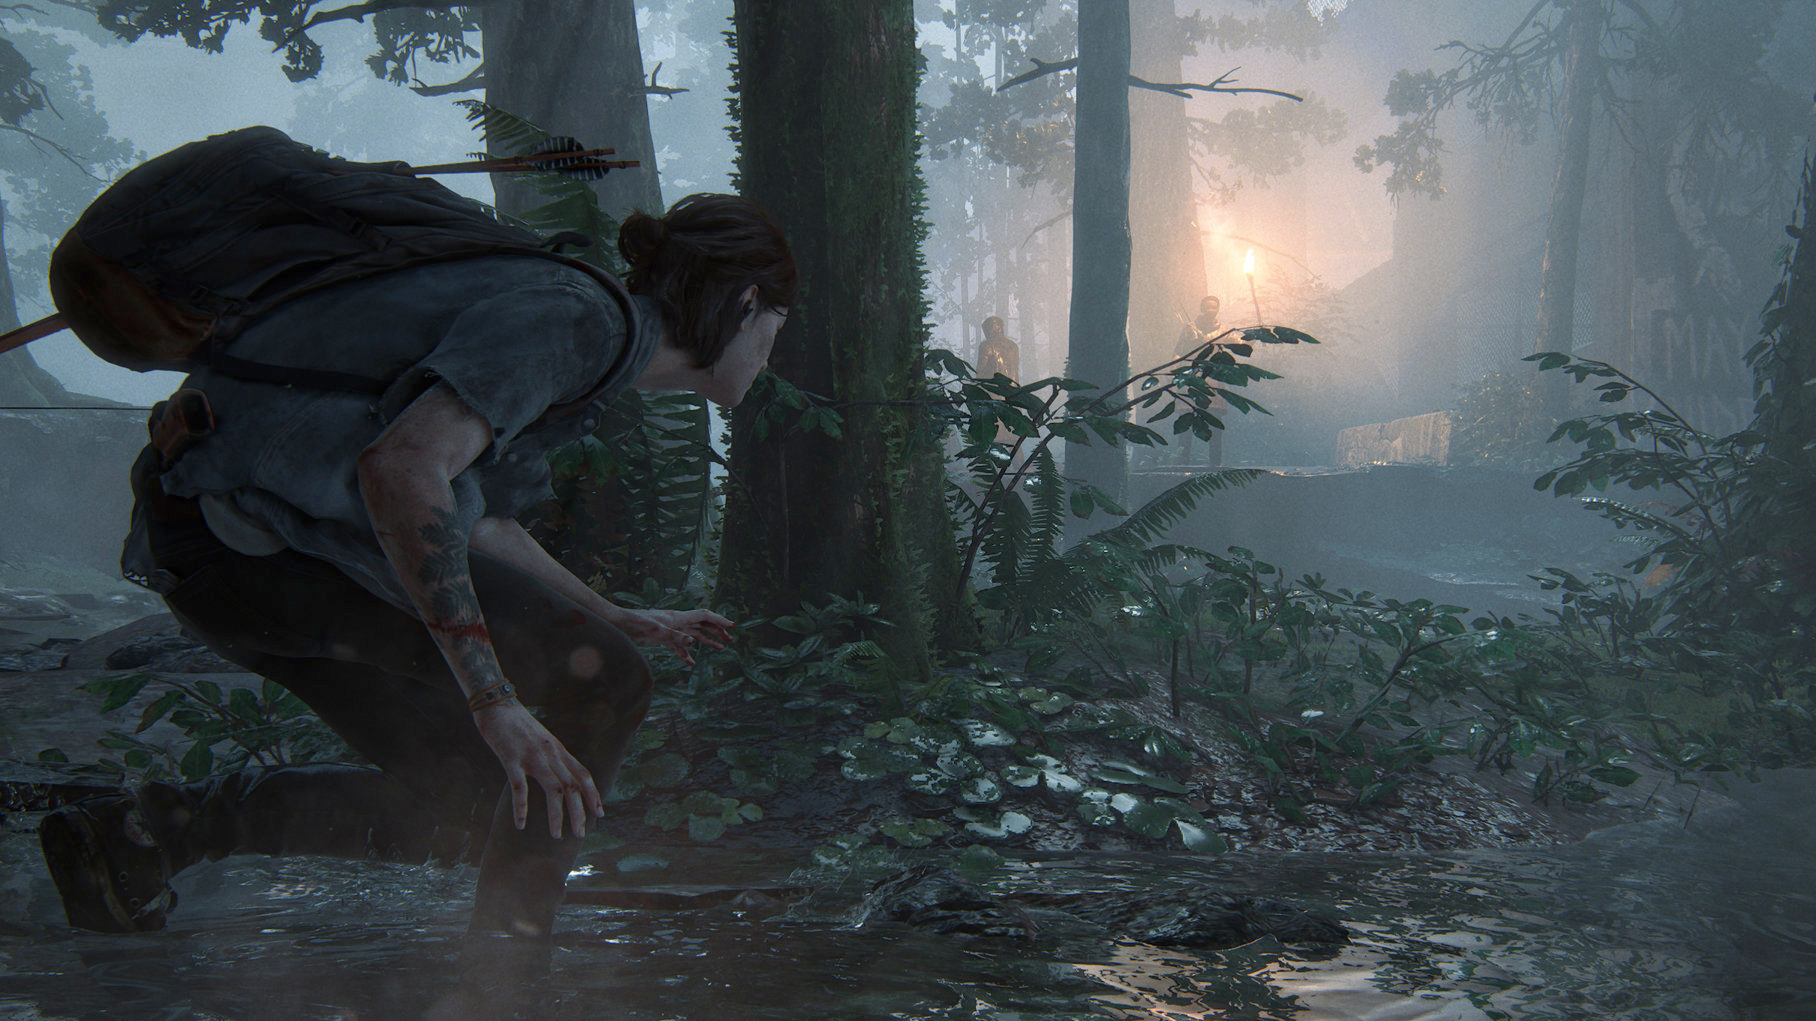 The Last of Us Part II official pricing and availability - GadgetMatch